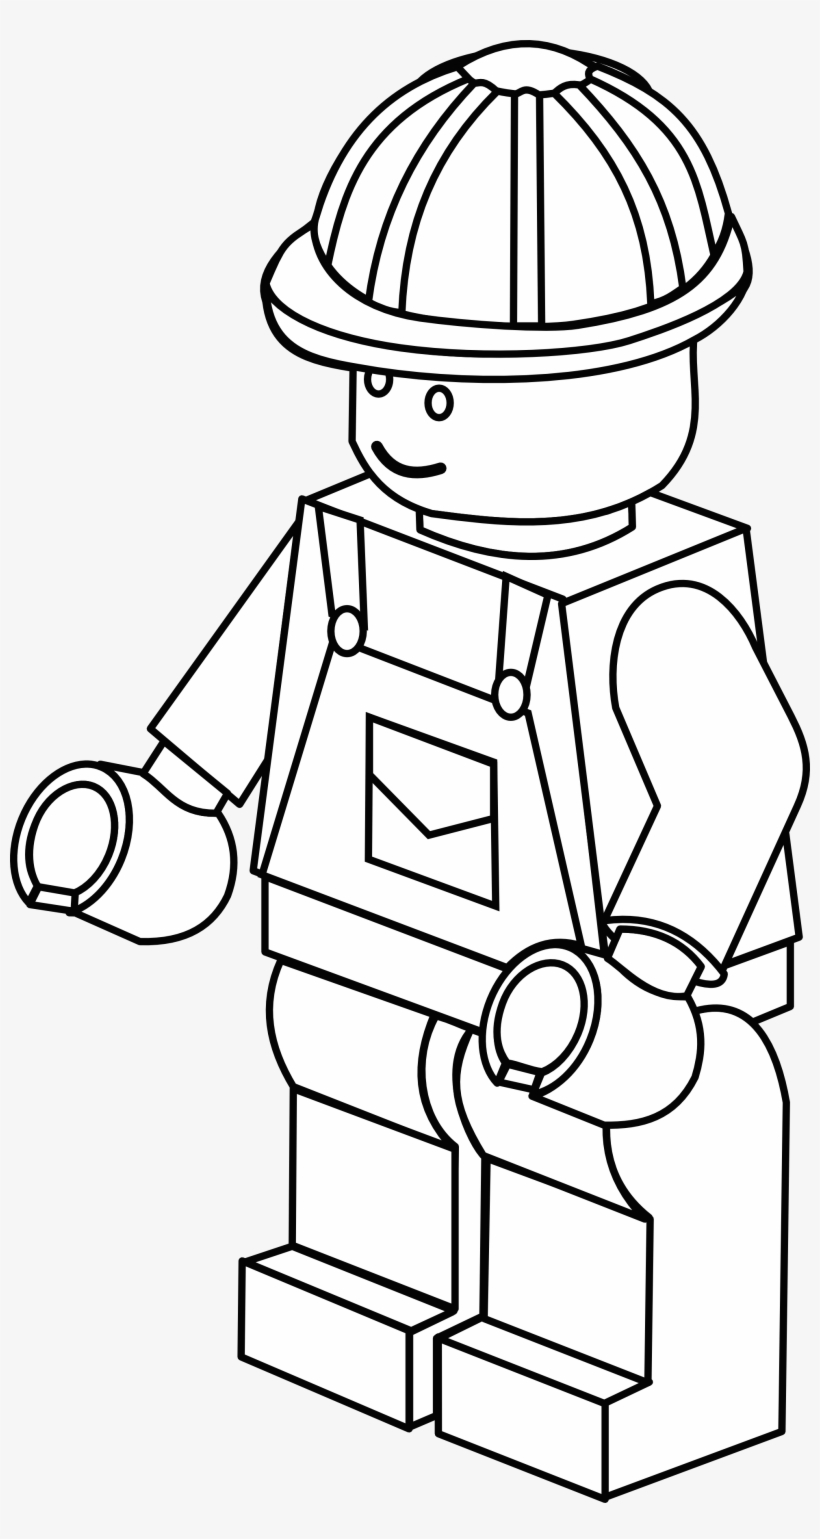 Wanted Lego Figure Coloring Page More Complex Lego - Lego Builder Coloring Pages, transparent png #2000012